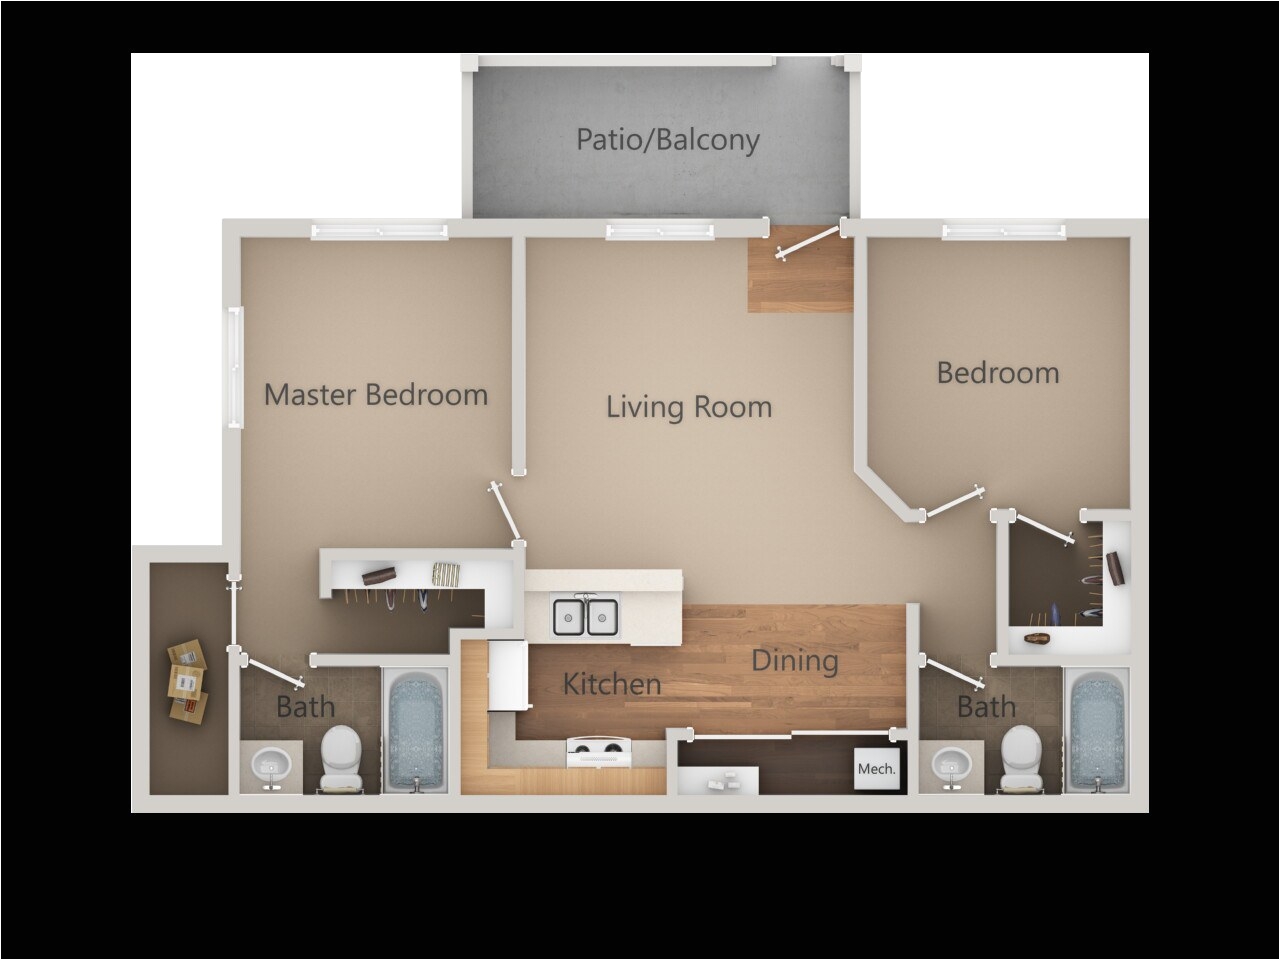 four bedroom apartments near me fresh fine living in apartments in sacramento ca of 40 new